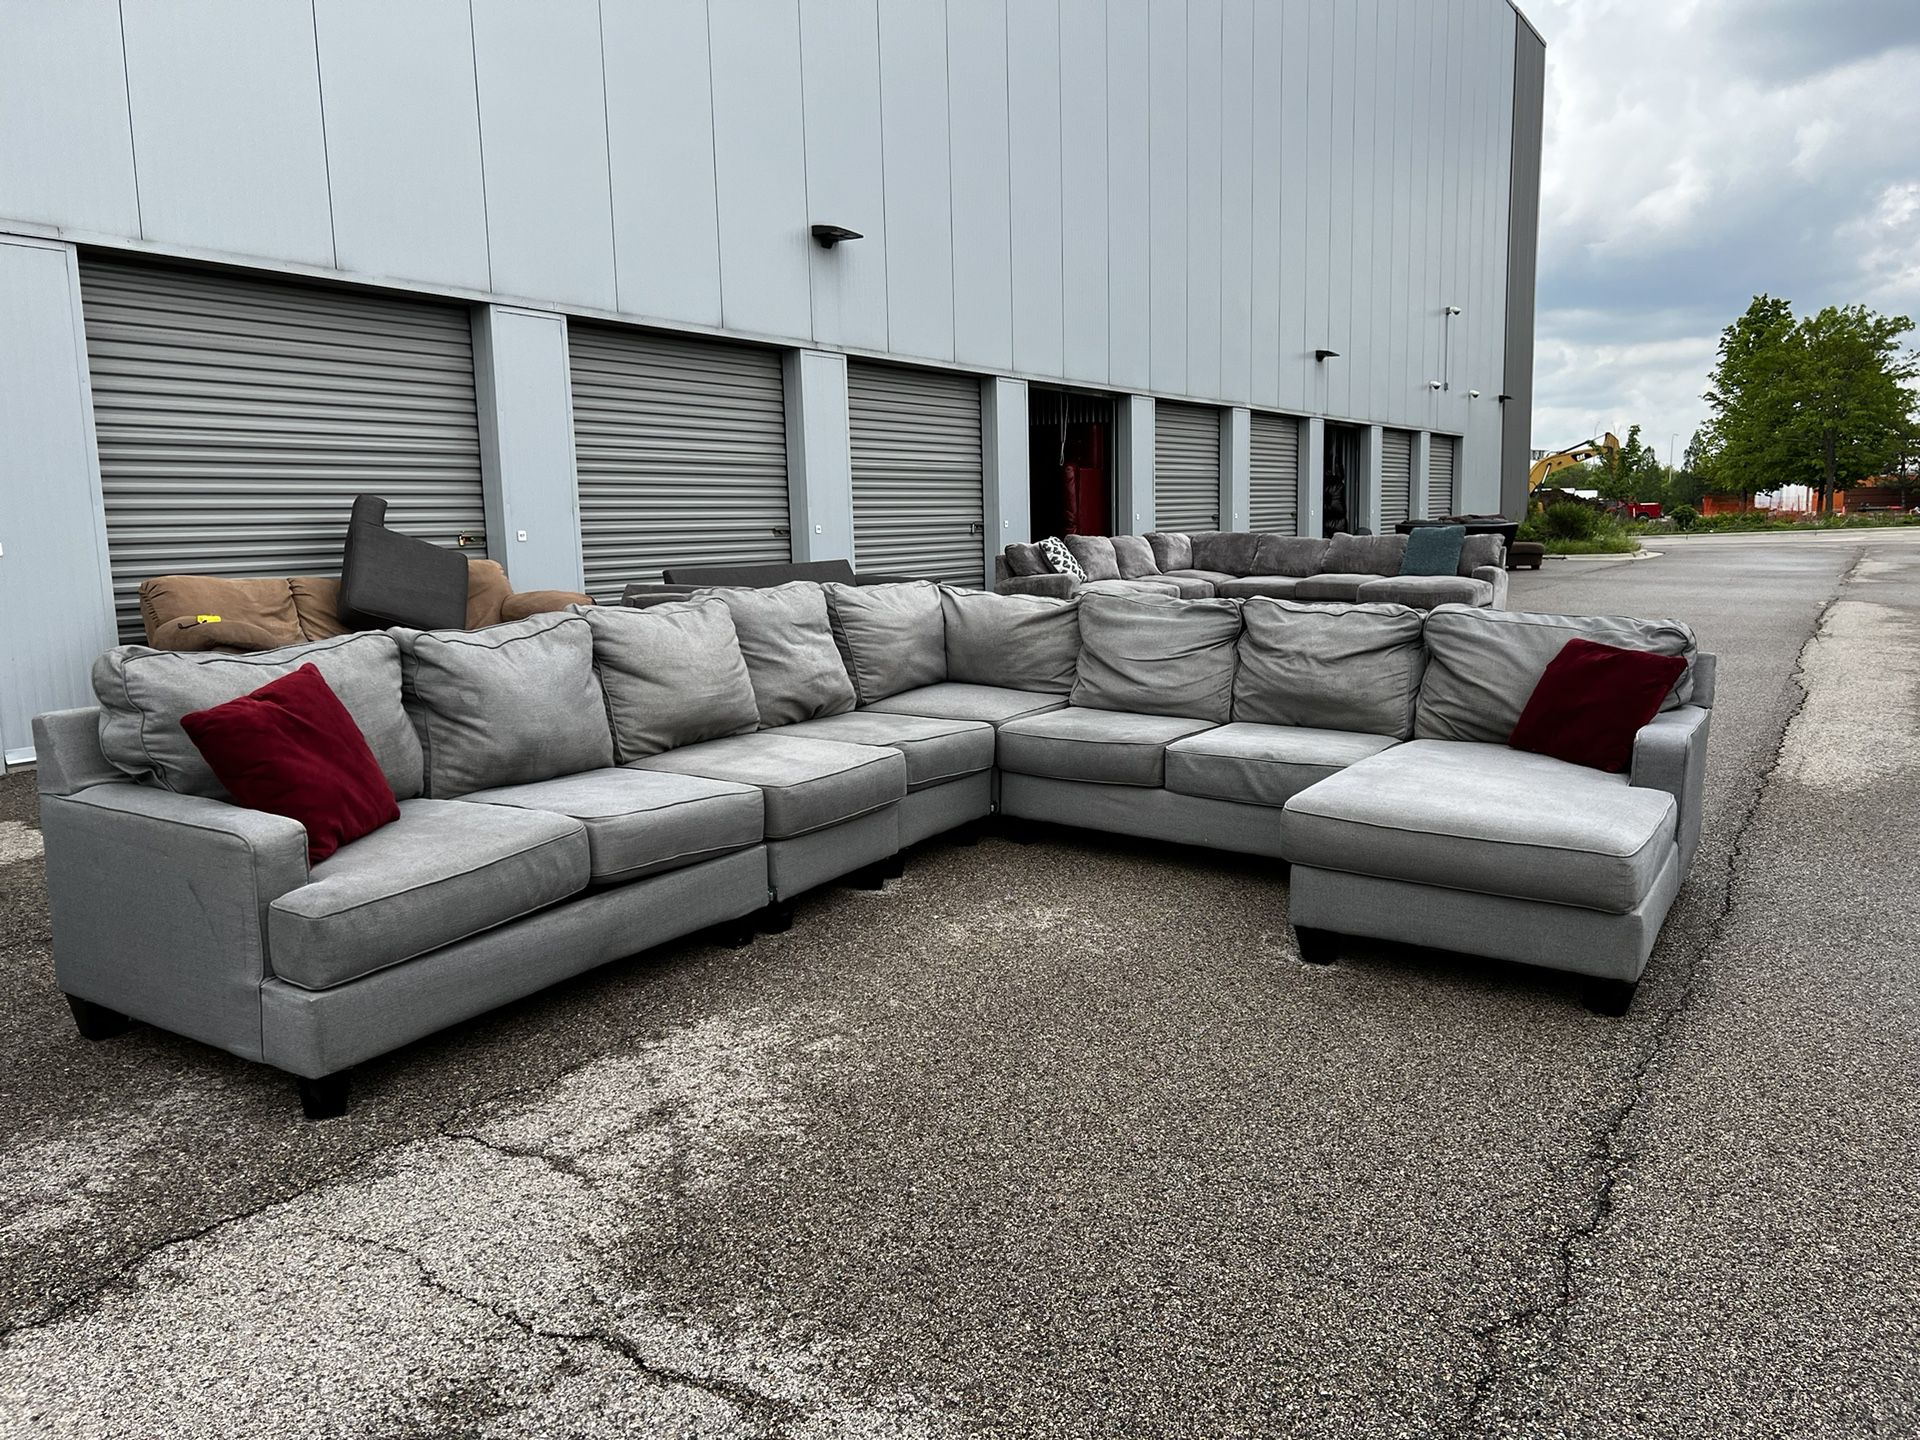 Beautiful Large Gray Sectional Couch! ***Free Delivery***